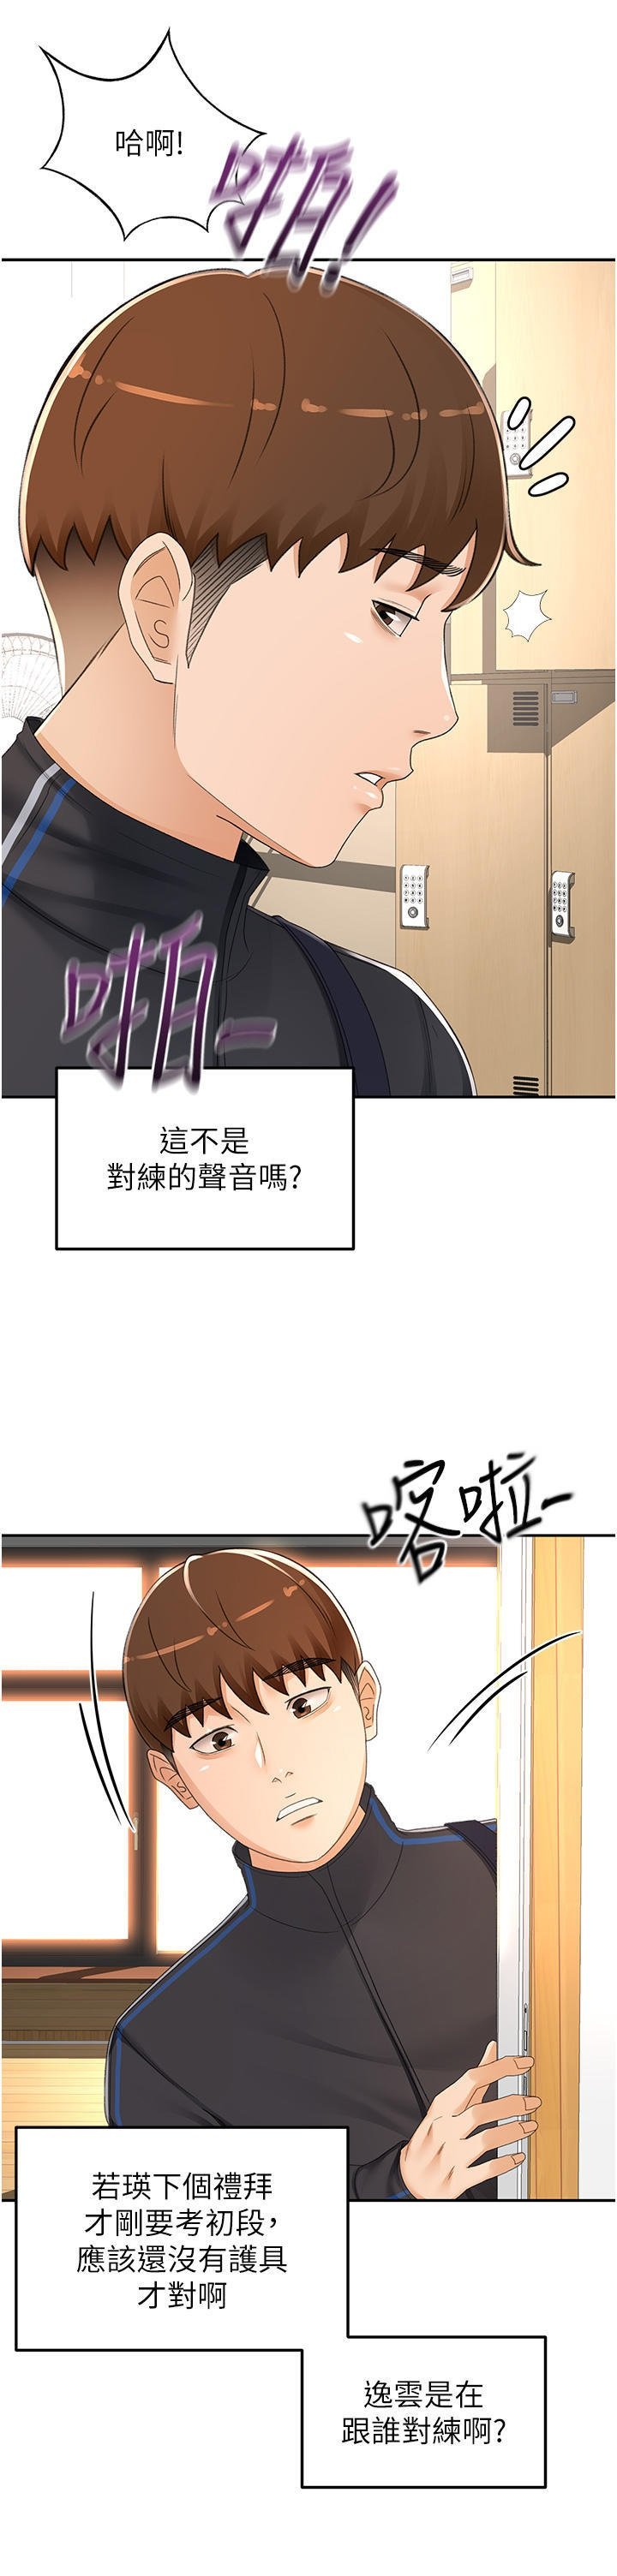 the-little-master-raw-chap-82-10